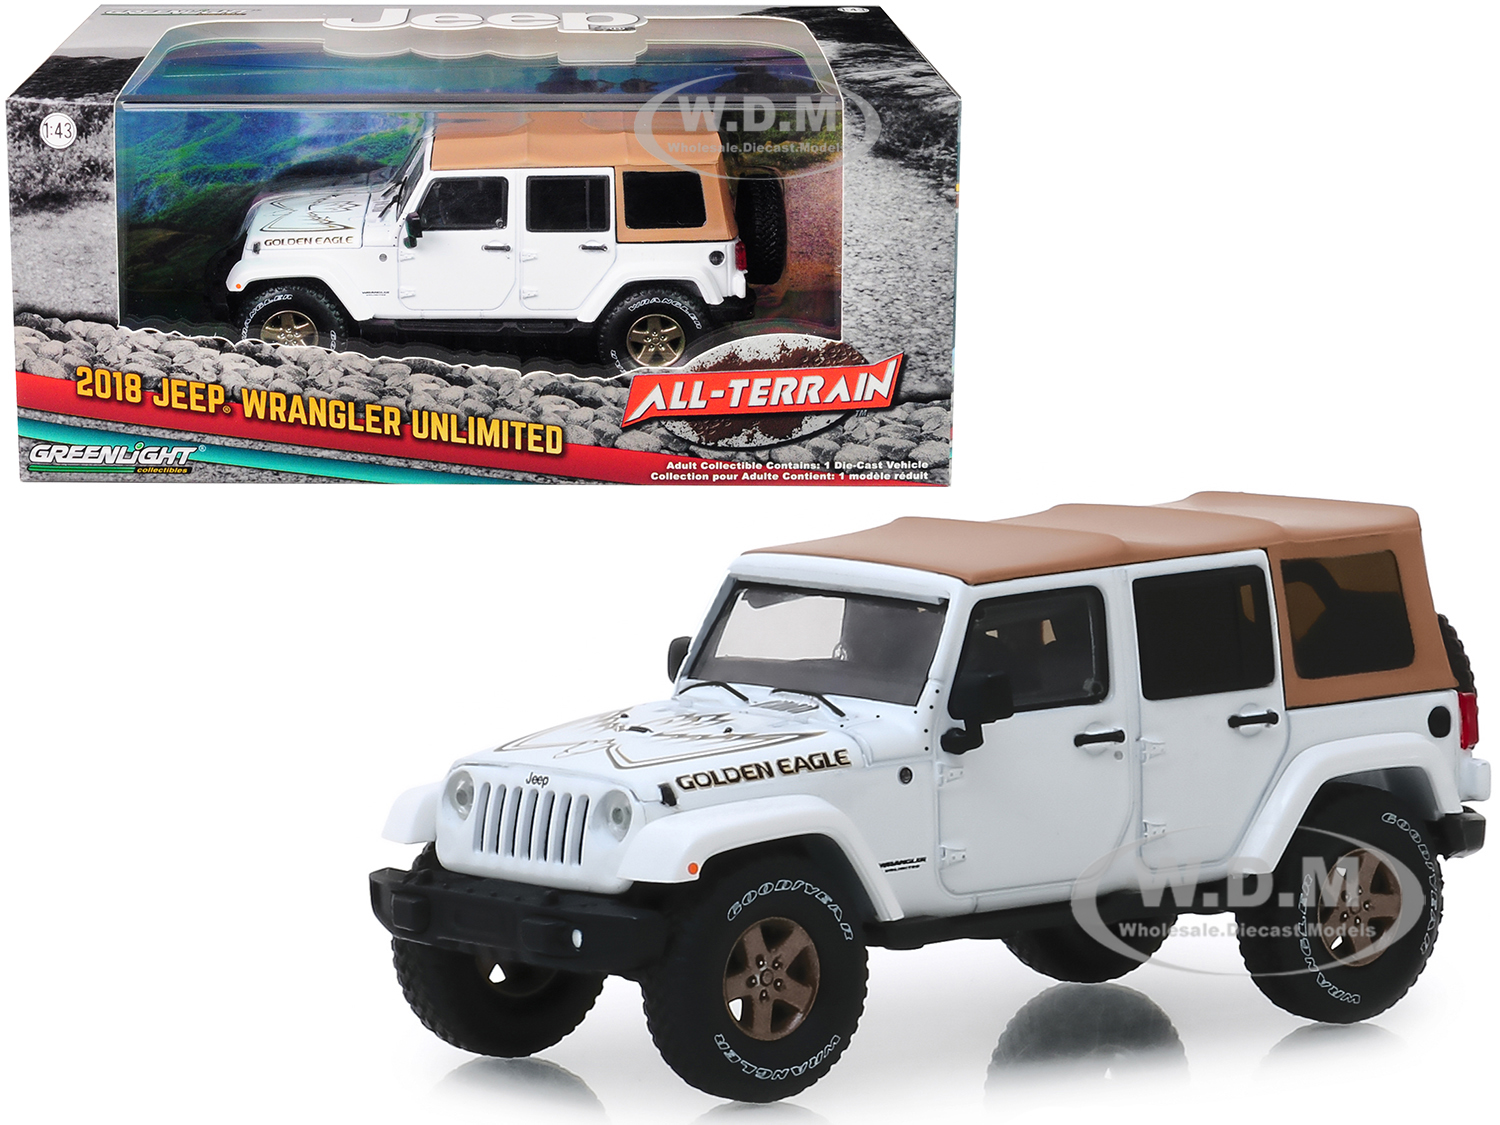 2018 Jeep Wrangler Unlimited "golden Eagle" White With Tan Top "all-terrain" Series 1/43 Diecast Model Car By Greenlight